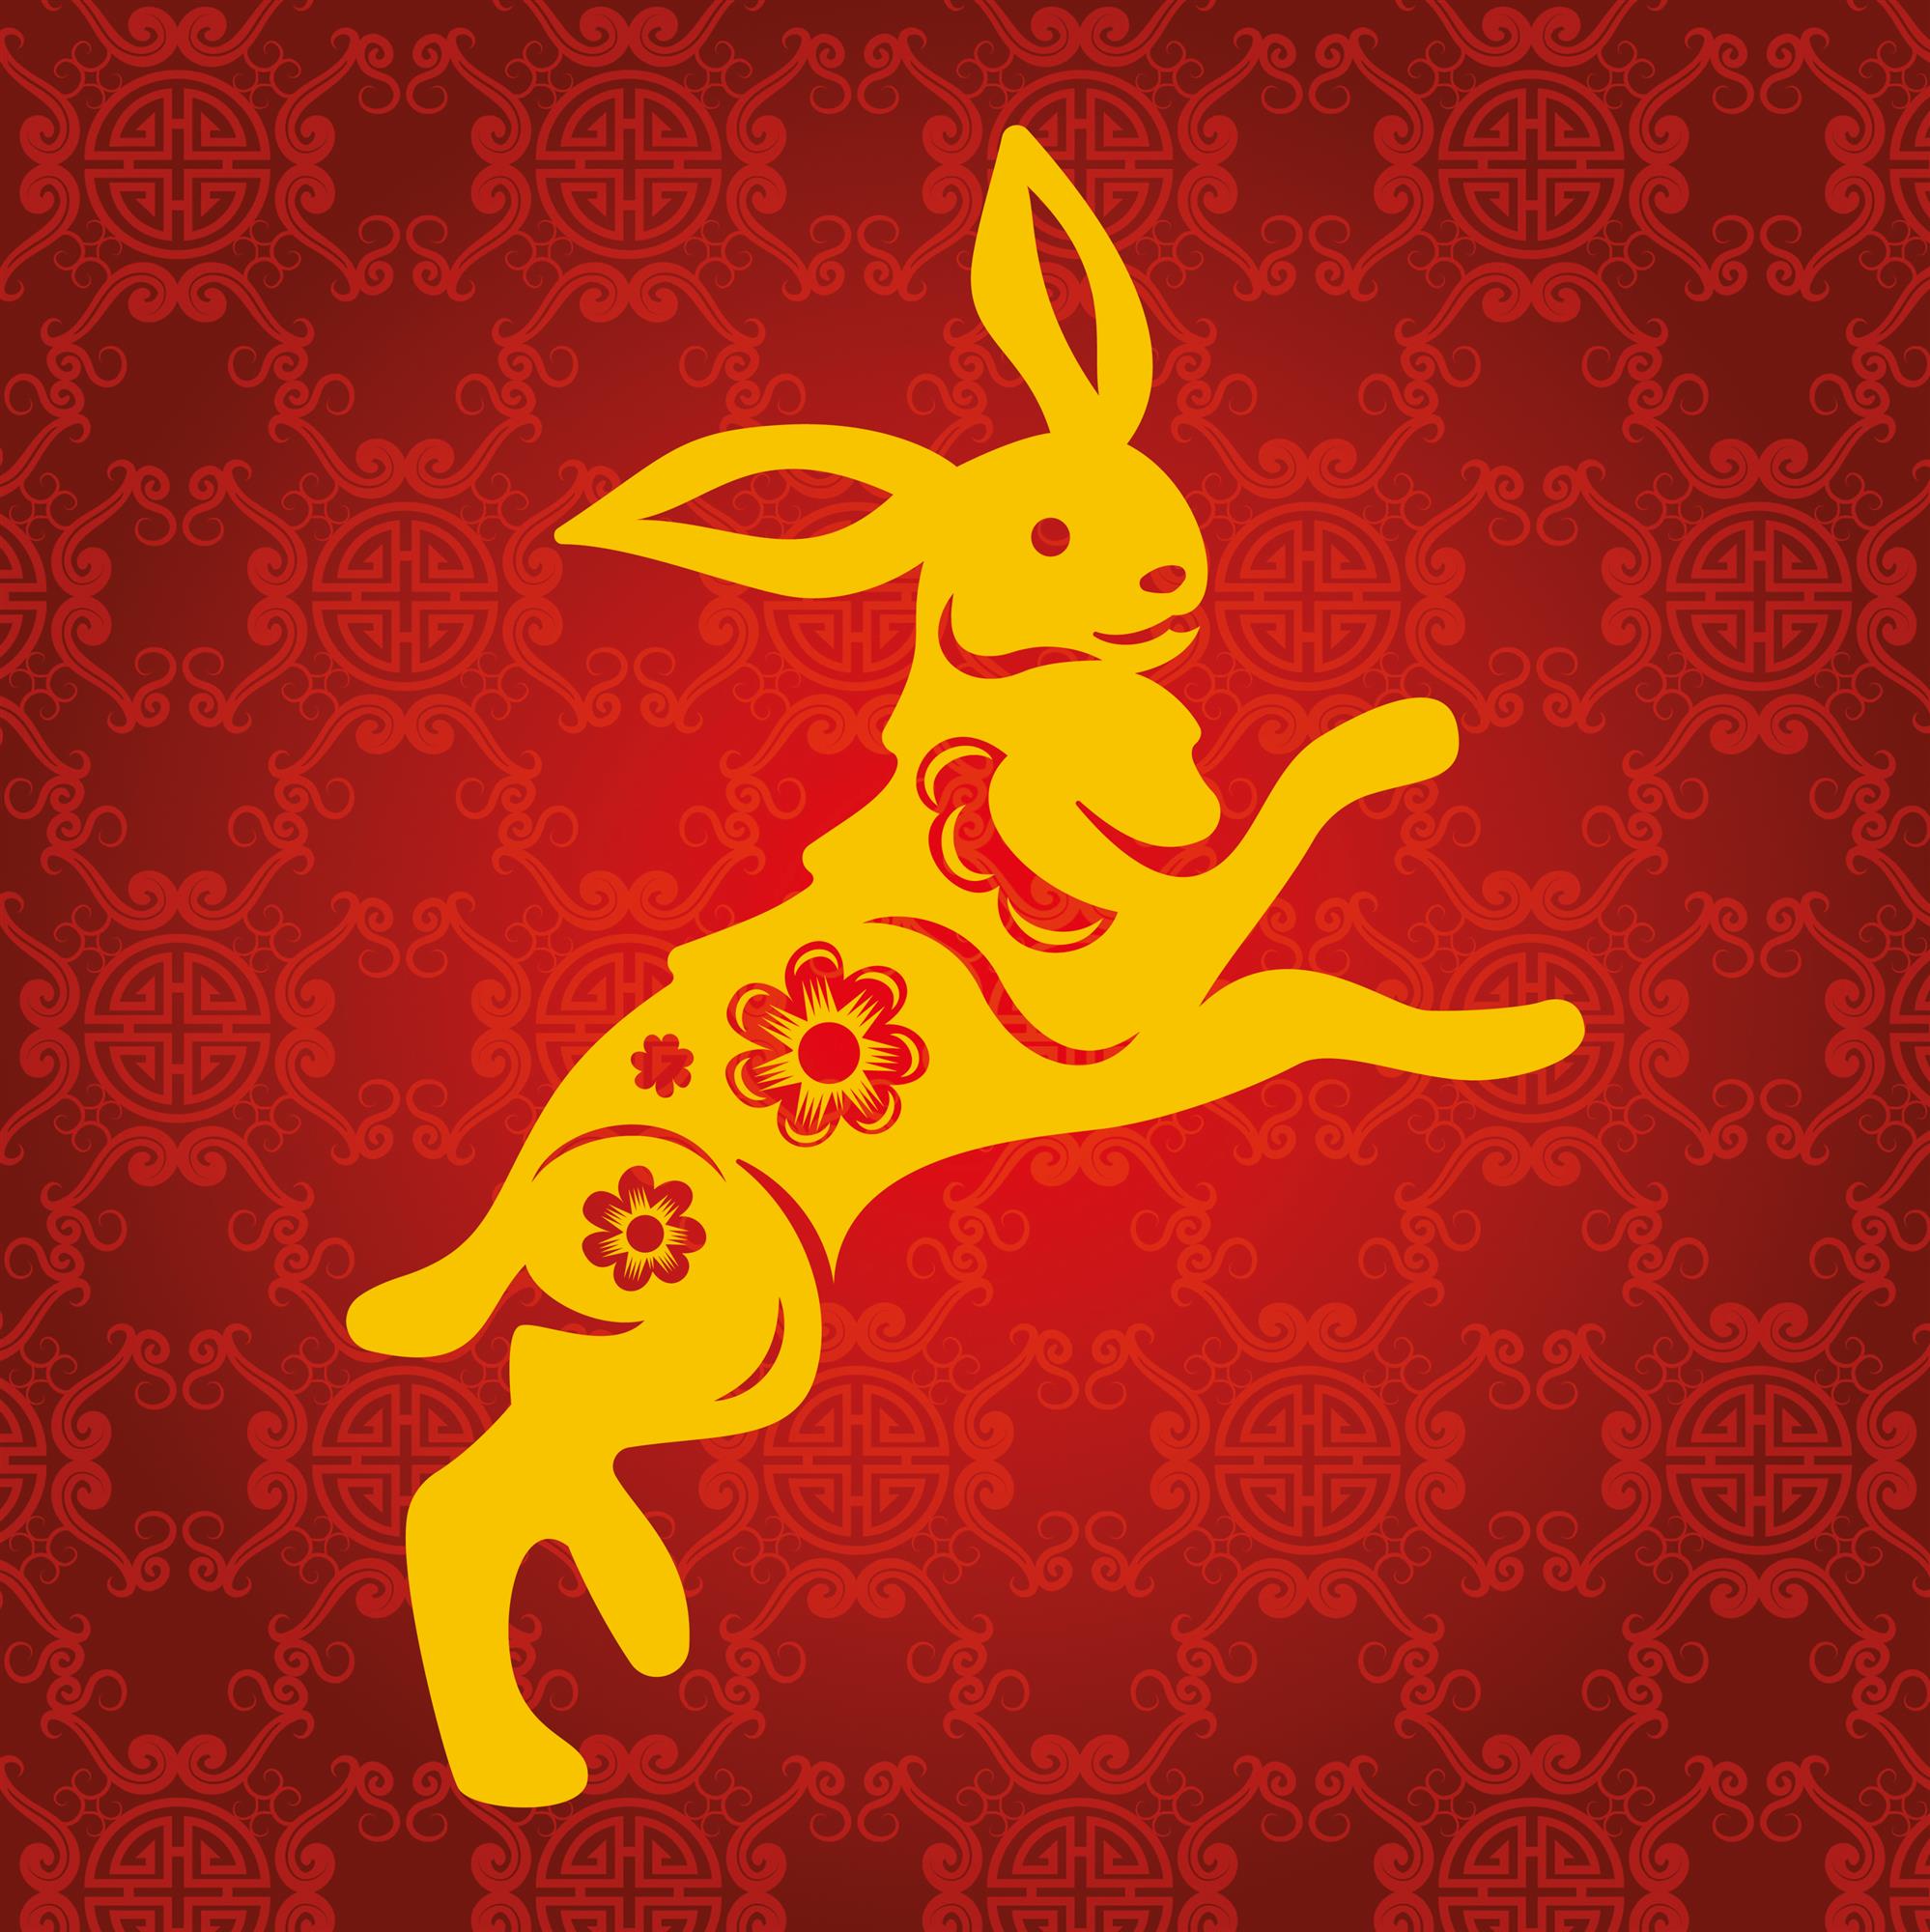 A Chinese style illustration of a rabbit in red and yellow